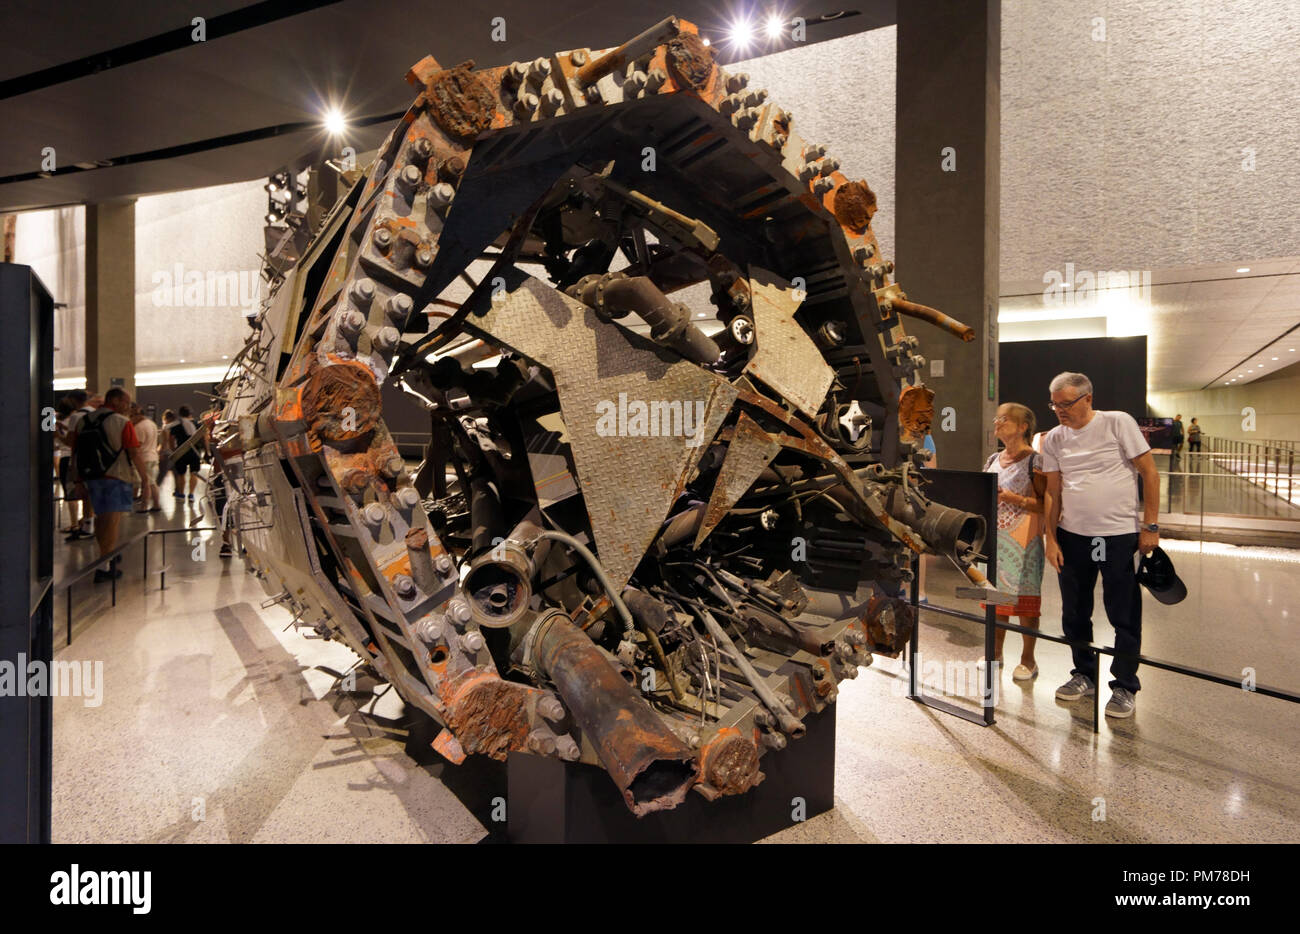 The wreckage of the communications antenna of the North Tower of World Trade Center on display in the 9/11 Memorial Museum, New York City.USA Stock Photo